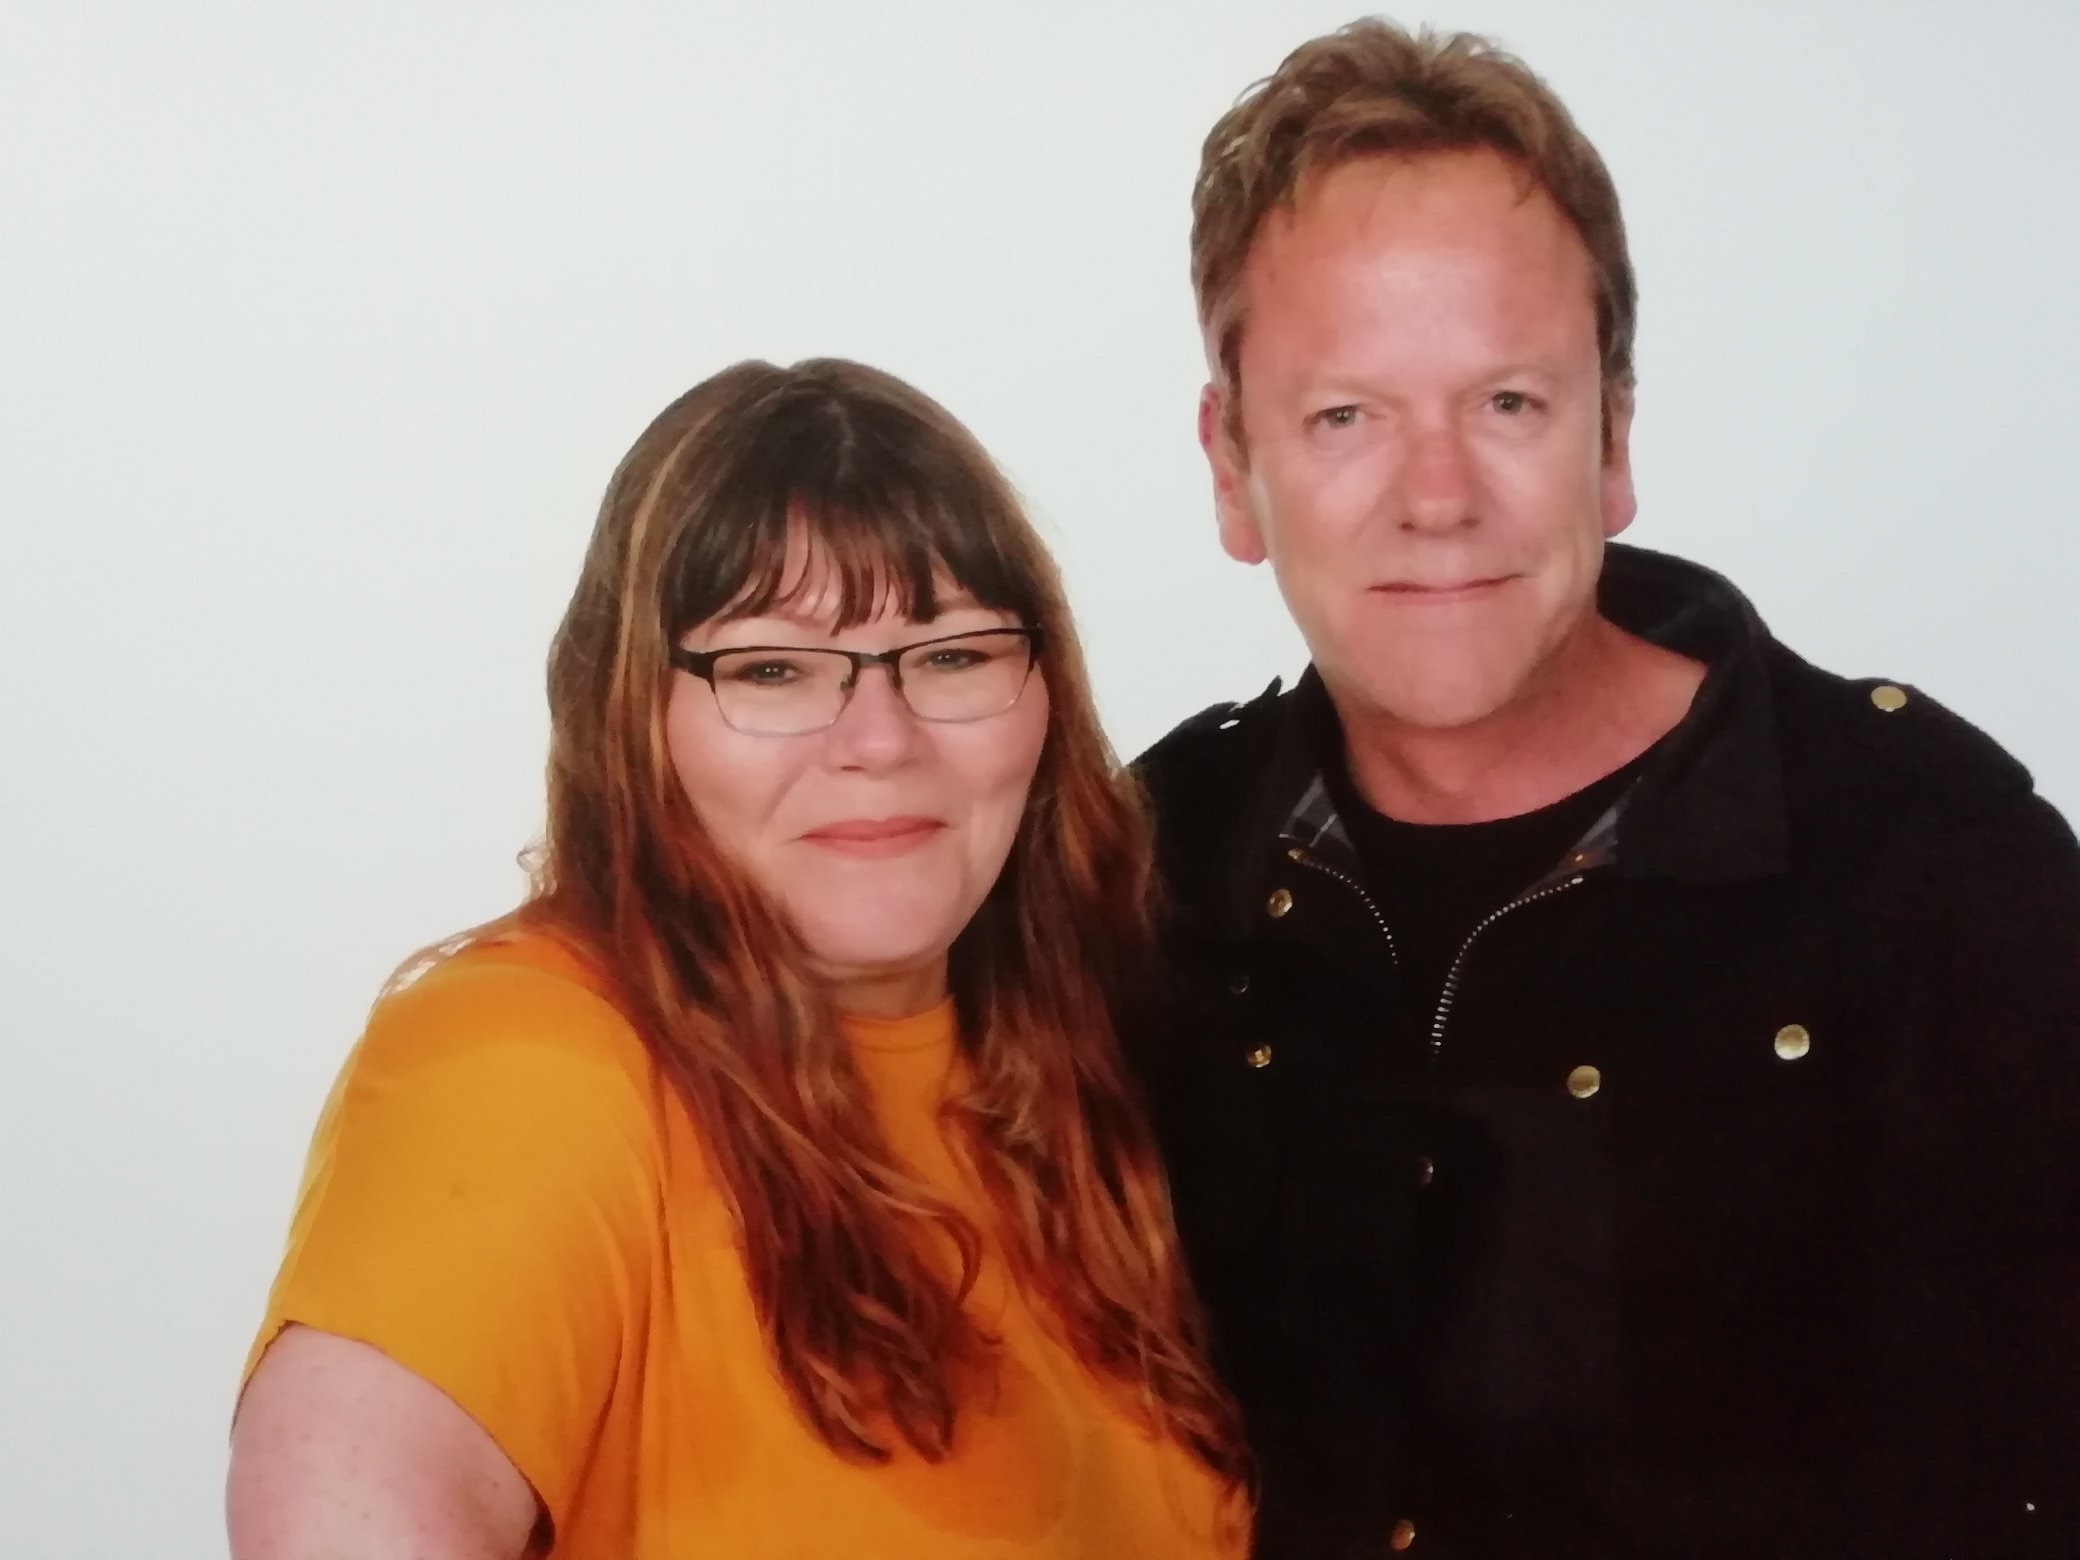 Lorraine Poole, from Rhyl, met actor Kiefer Sutherland at Wrexham Comic Con: We waited all day to meet him. It rained all day, so by the time I actually got to him I was soaked through. So totally worth it. He was very pleasant and I’ll never